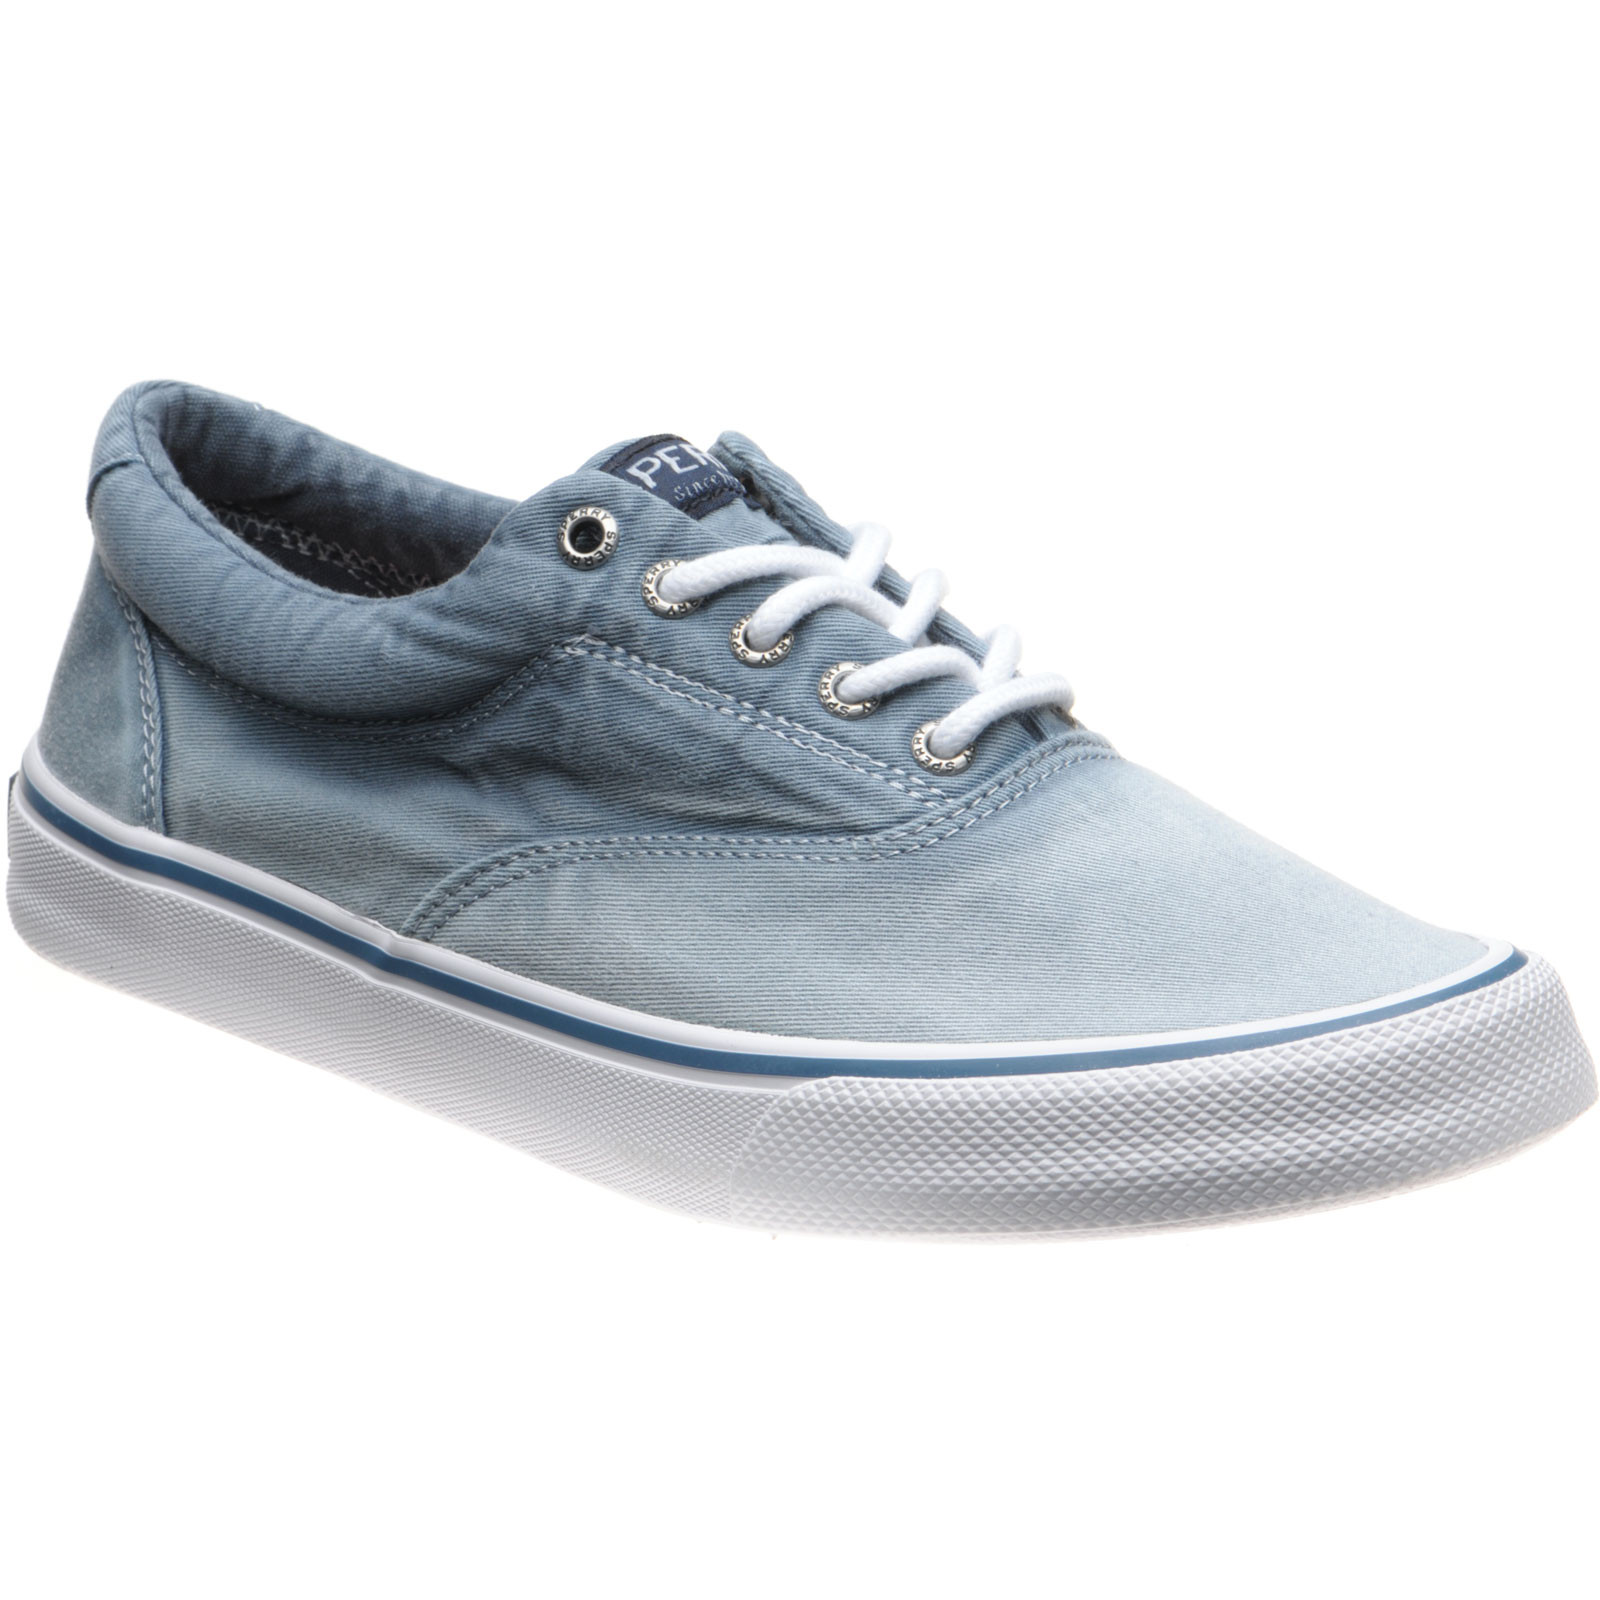 Sperry shoes | Sperry Shoes | Striper II rubber-soled Oxfords in Navy ...